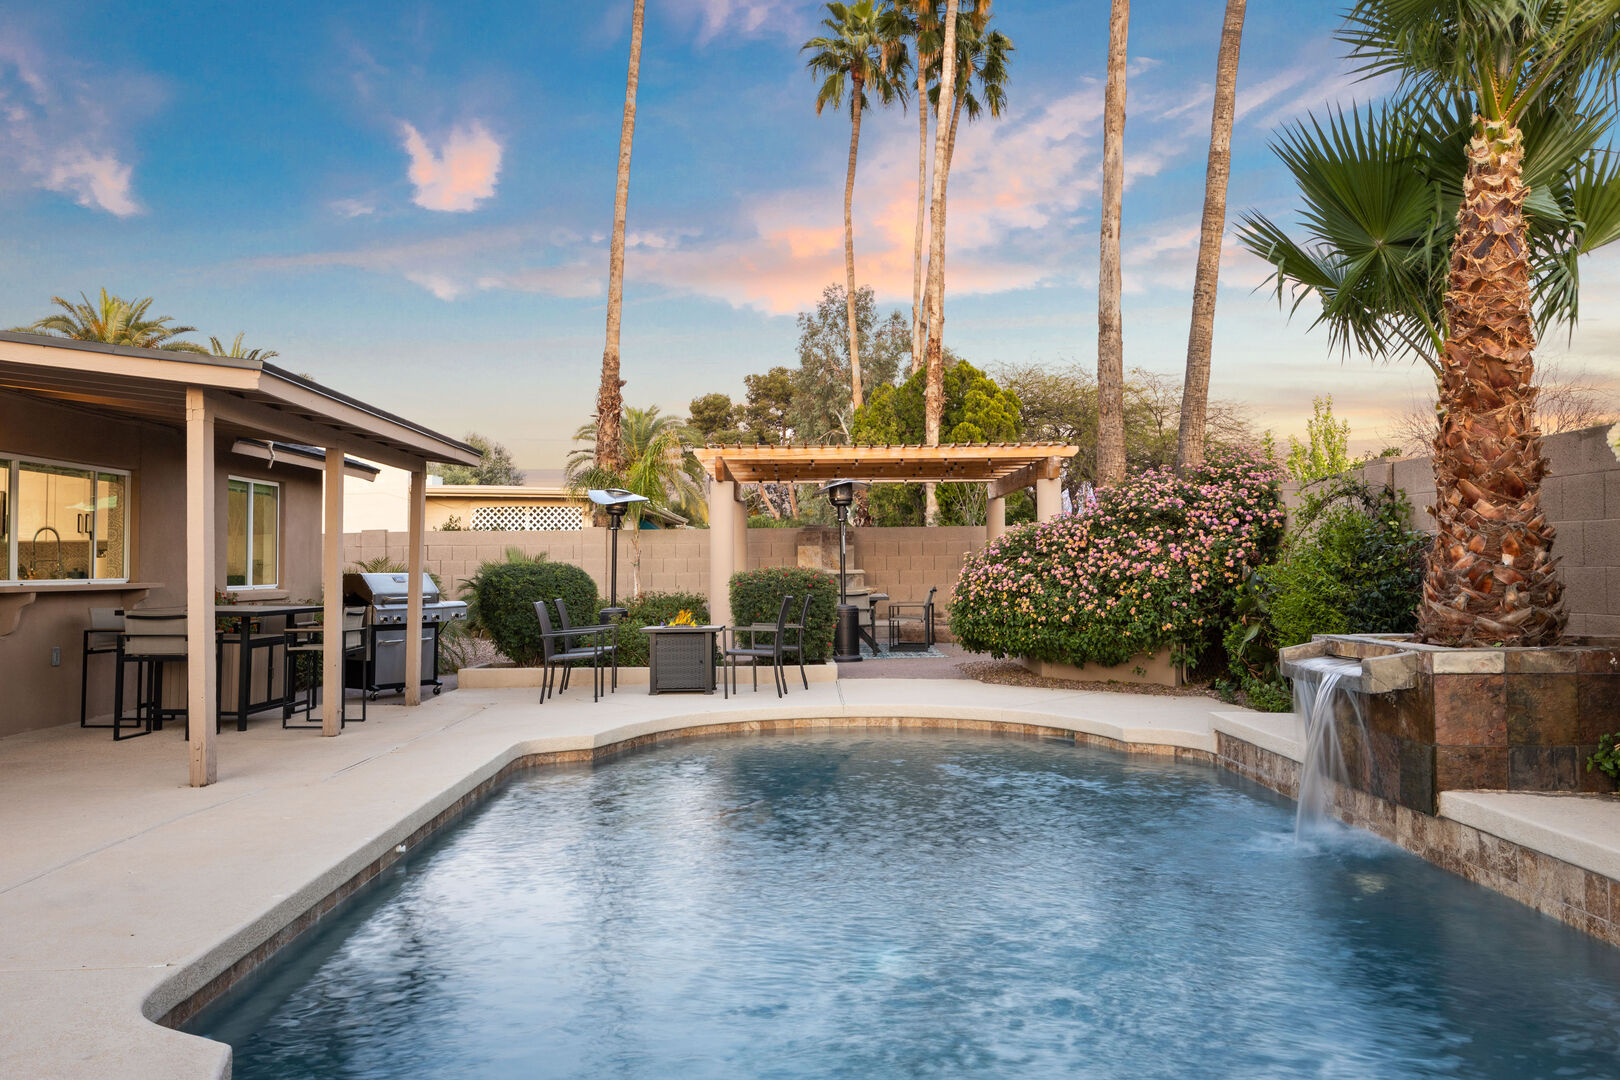 Beautiful Outdoor Pool Area with Neighboring Palms